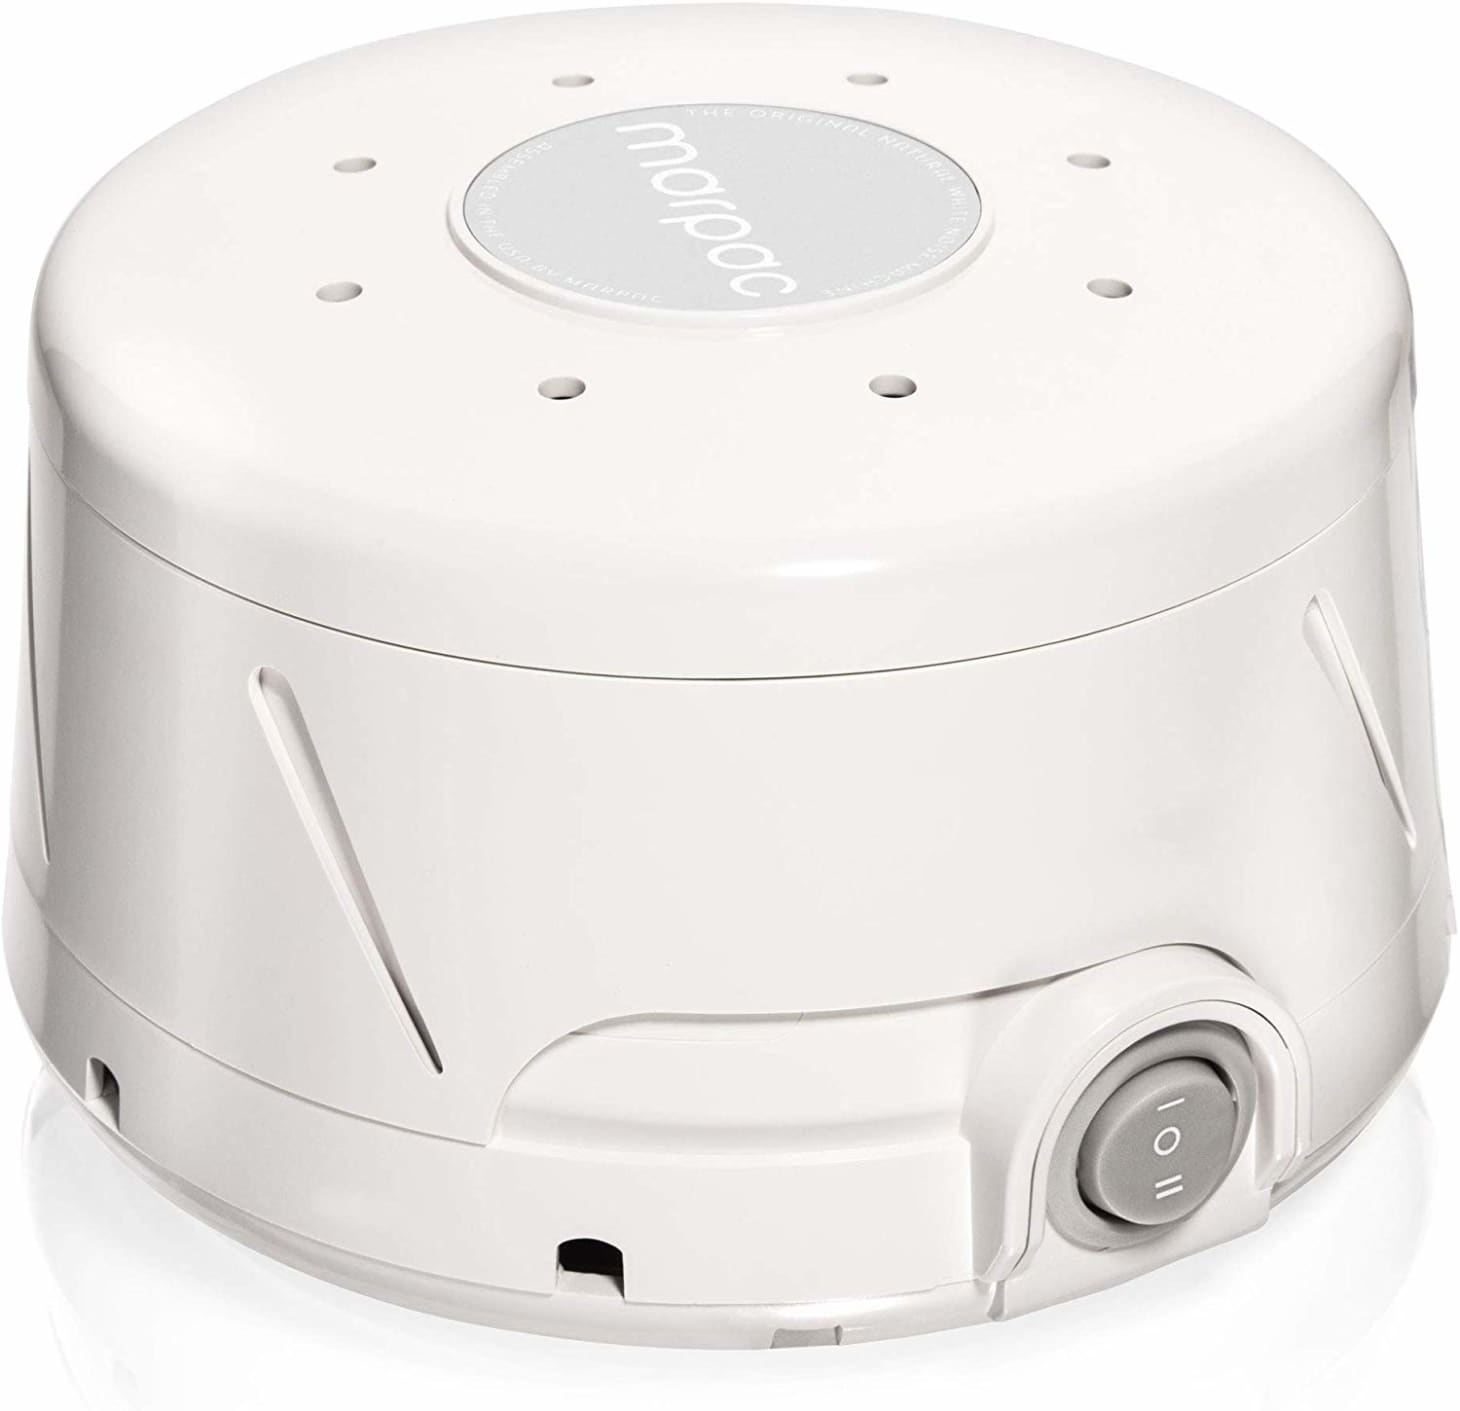 Top Selling Noise Machines on Sale at Amazon Apartment Therapy